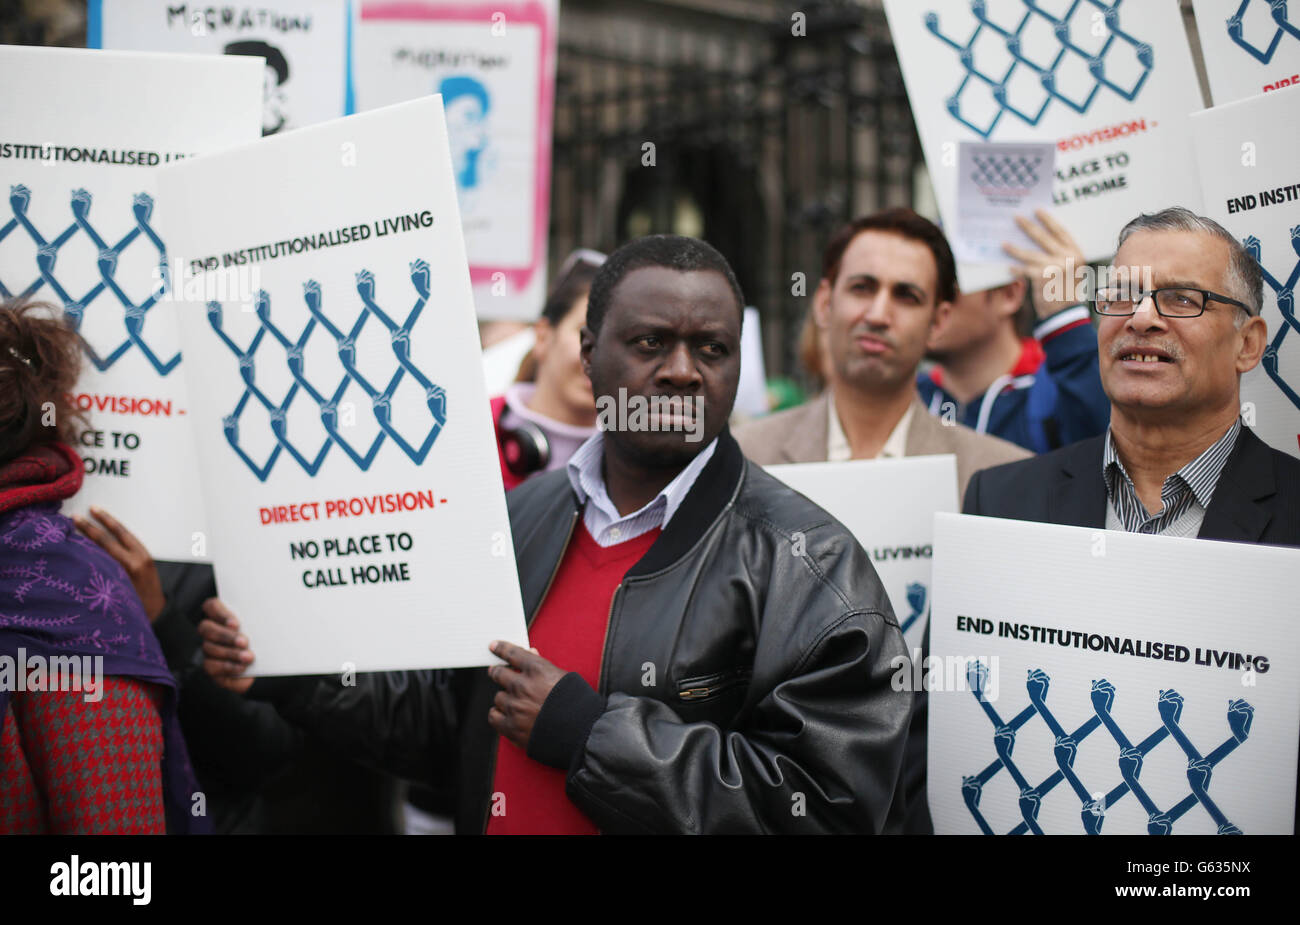 Asylum seekers, refugees, human rights supporters and members of the public march to the Department of Justice to send a message to the Government demanding an end to the system of institutionalised accommodation for asylum seekers, known as Direct Provision. Stock Photo